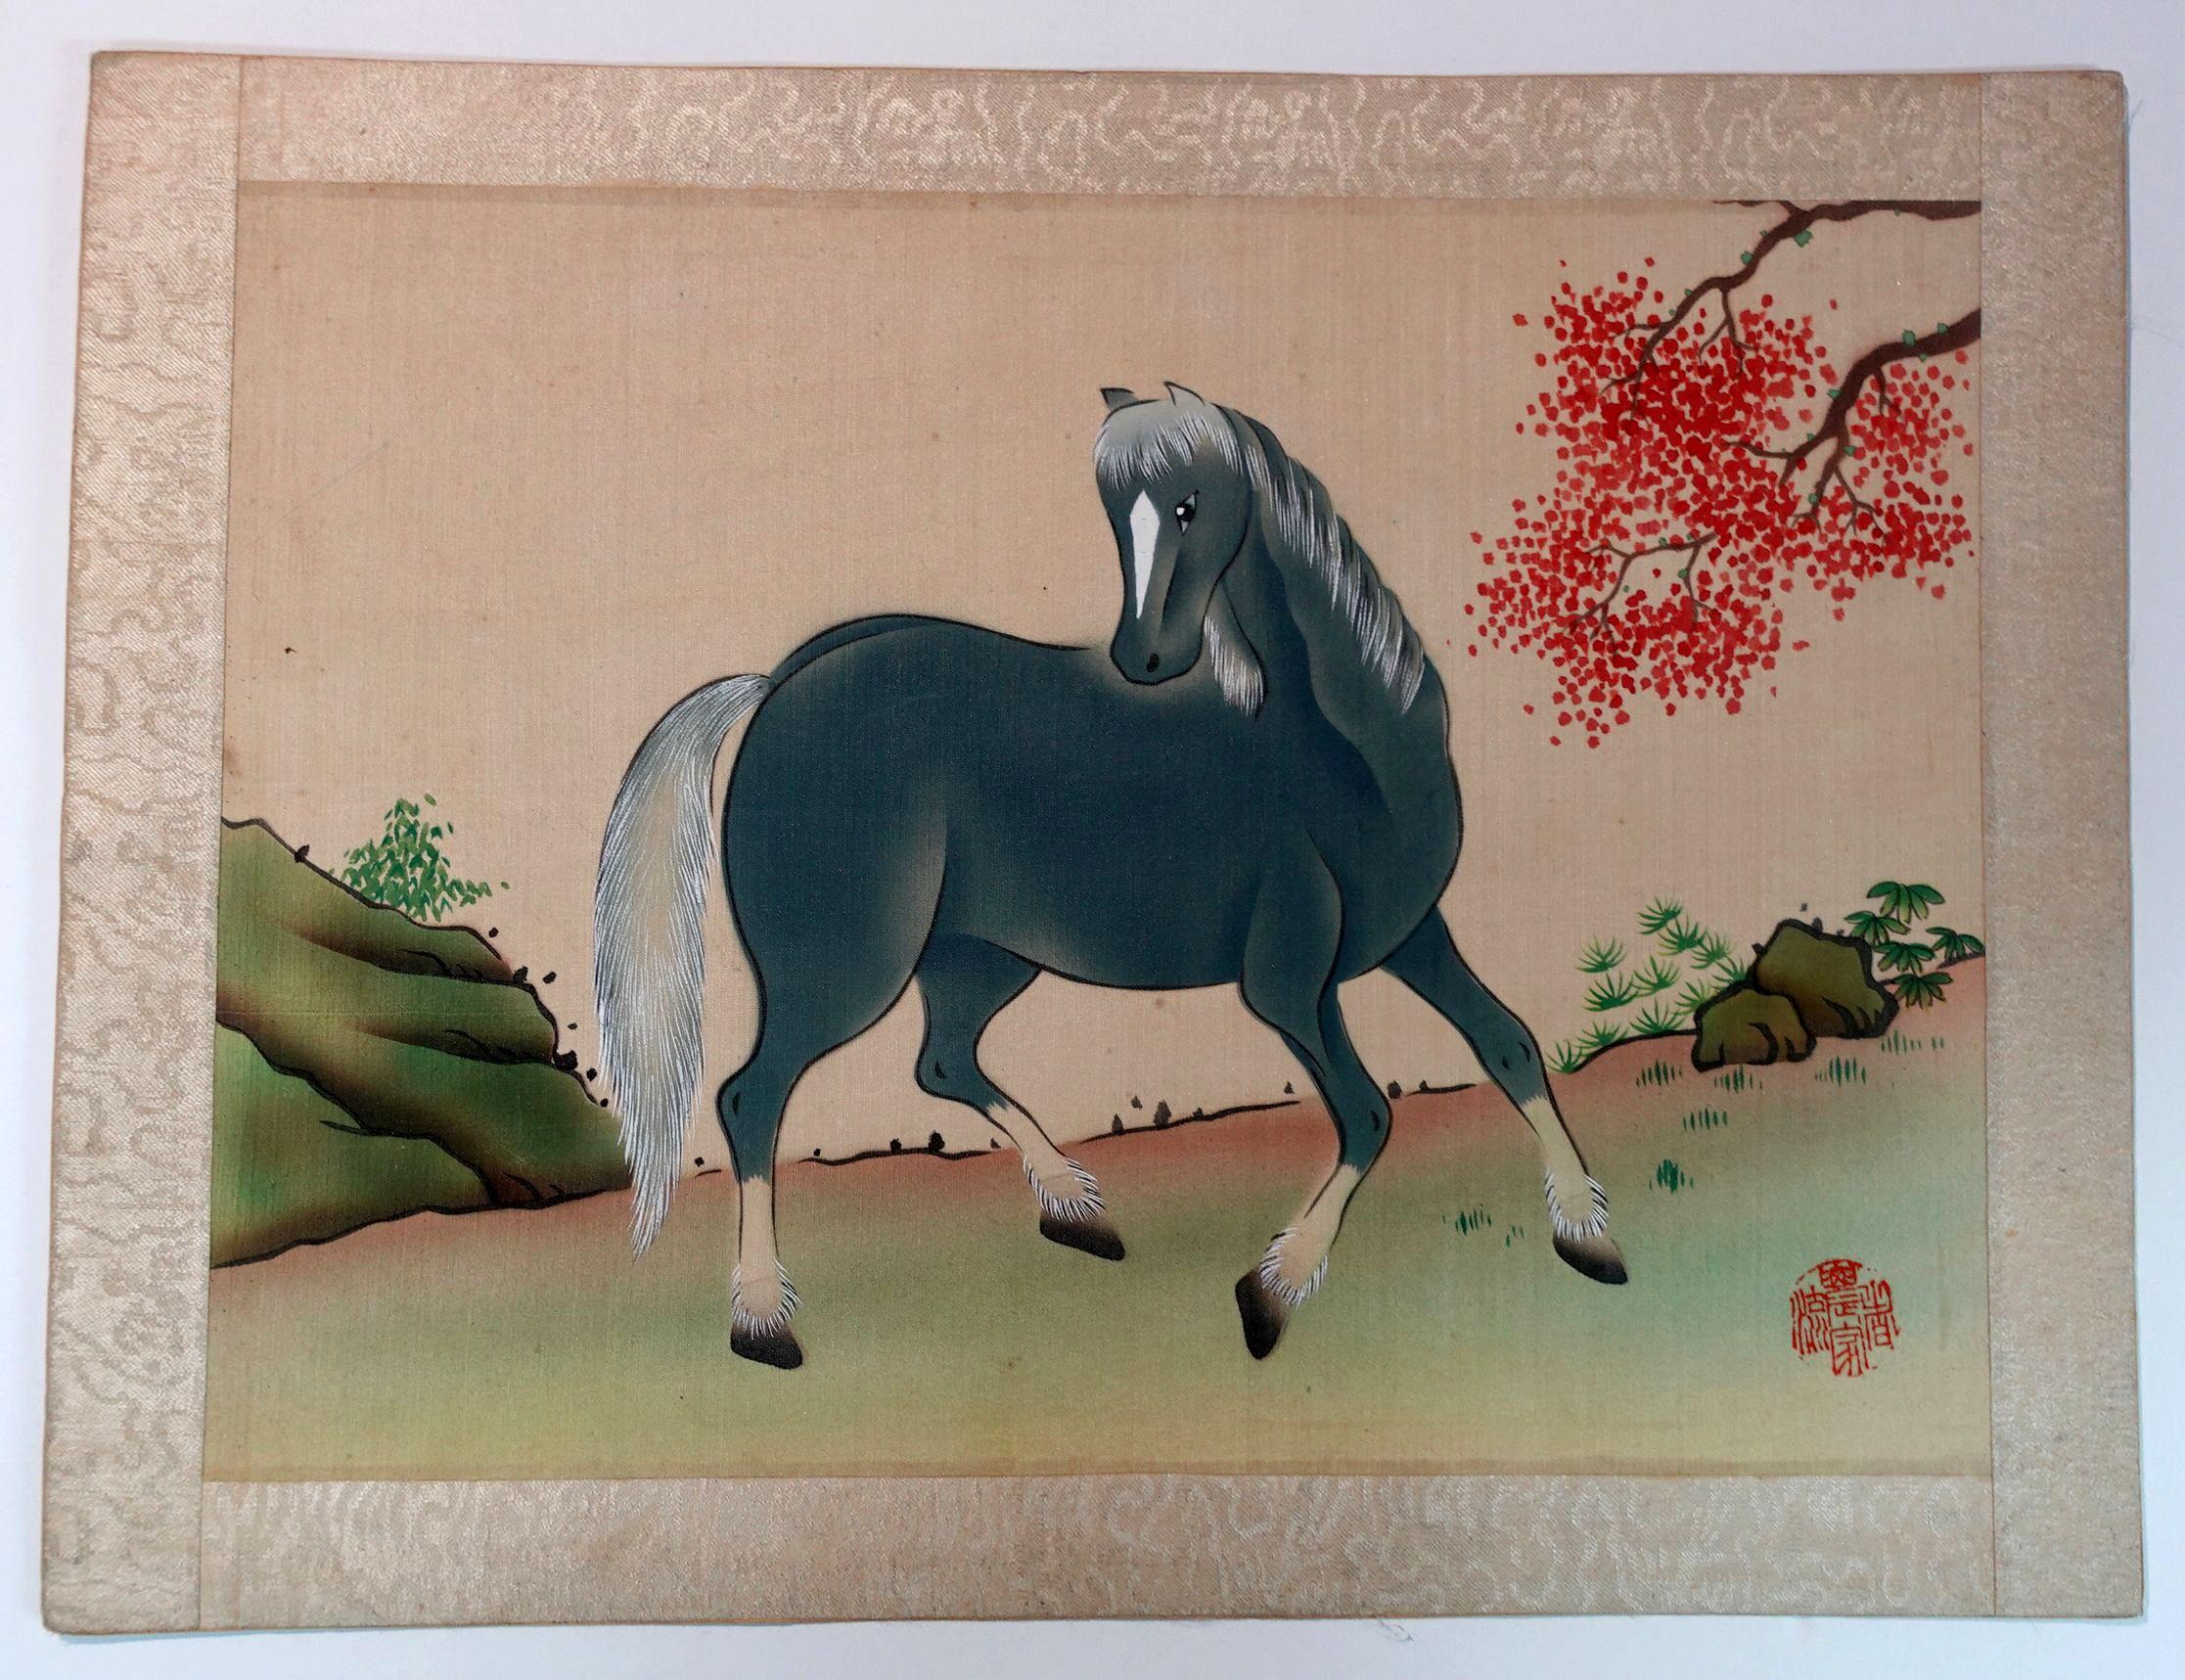 4 Chinese paintings of horses with different colors and poses. Watercolor and gouache on silk. Red seals, mounted on thick heavy paper and silk borders with no frames, from the 19th century.
Each overall: 10.5 x 13.75in.